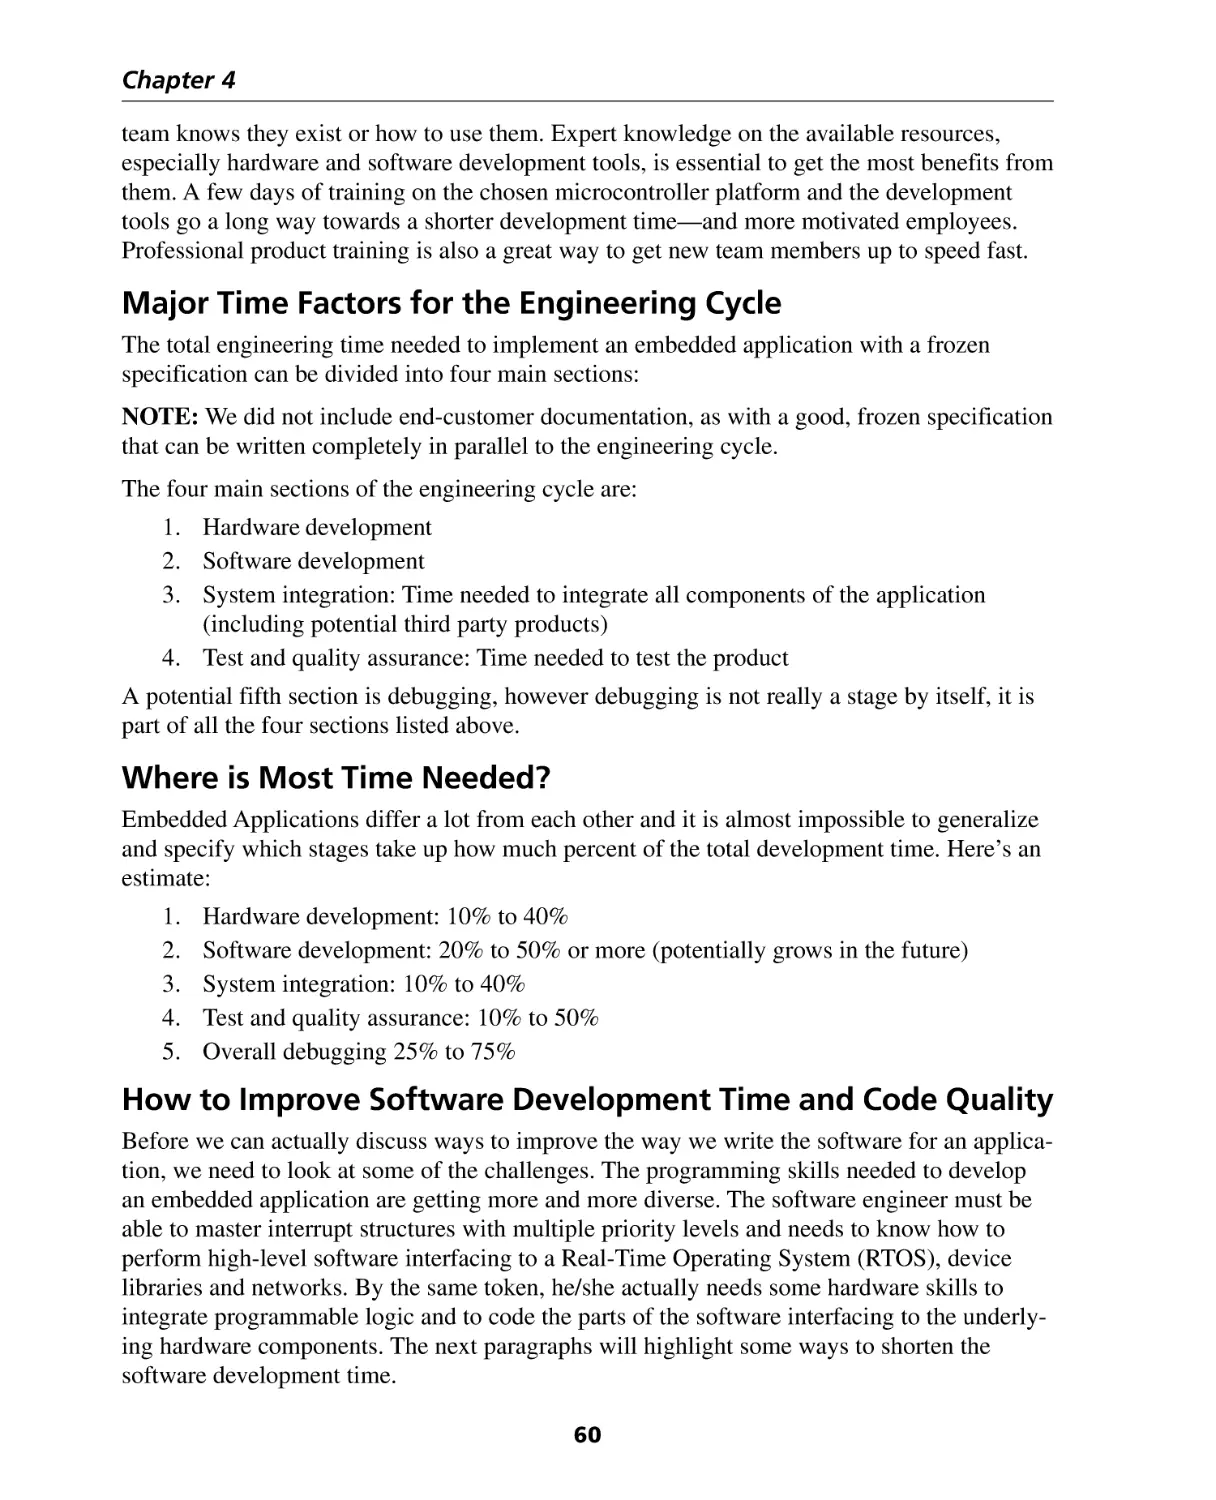 Major Time Factors for the Engineering Cycle
Where is Most Time Needed?
How to Improve Software Development Time and Code Quality